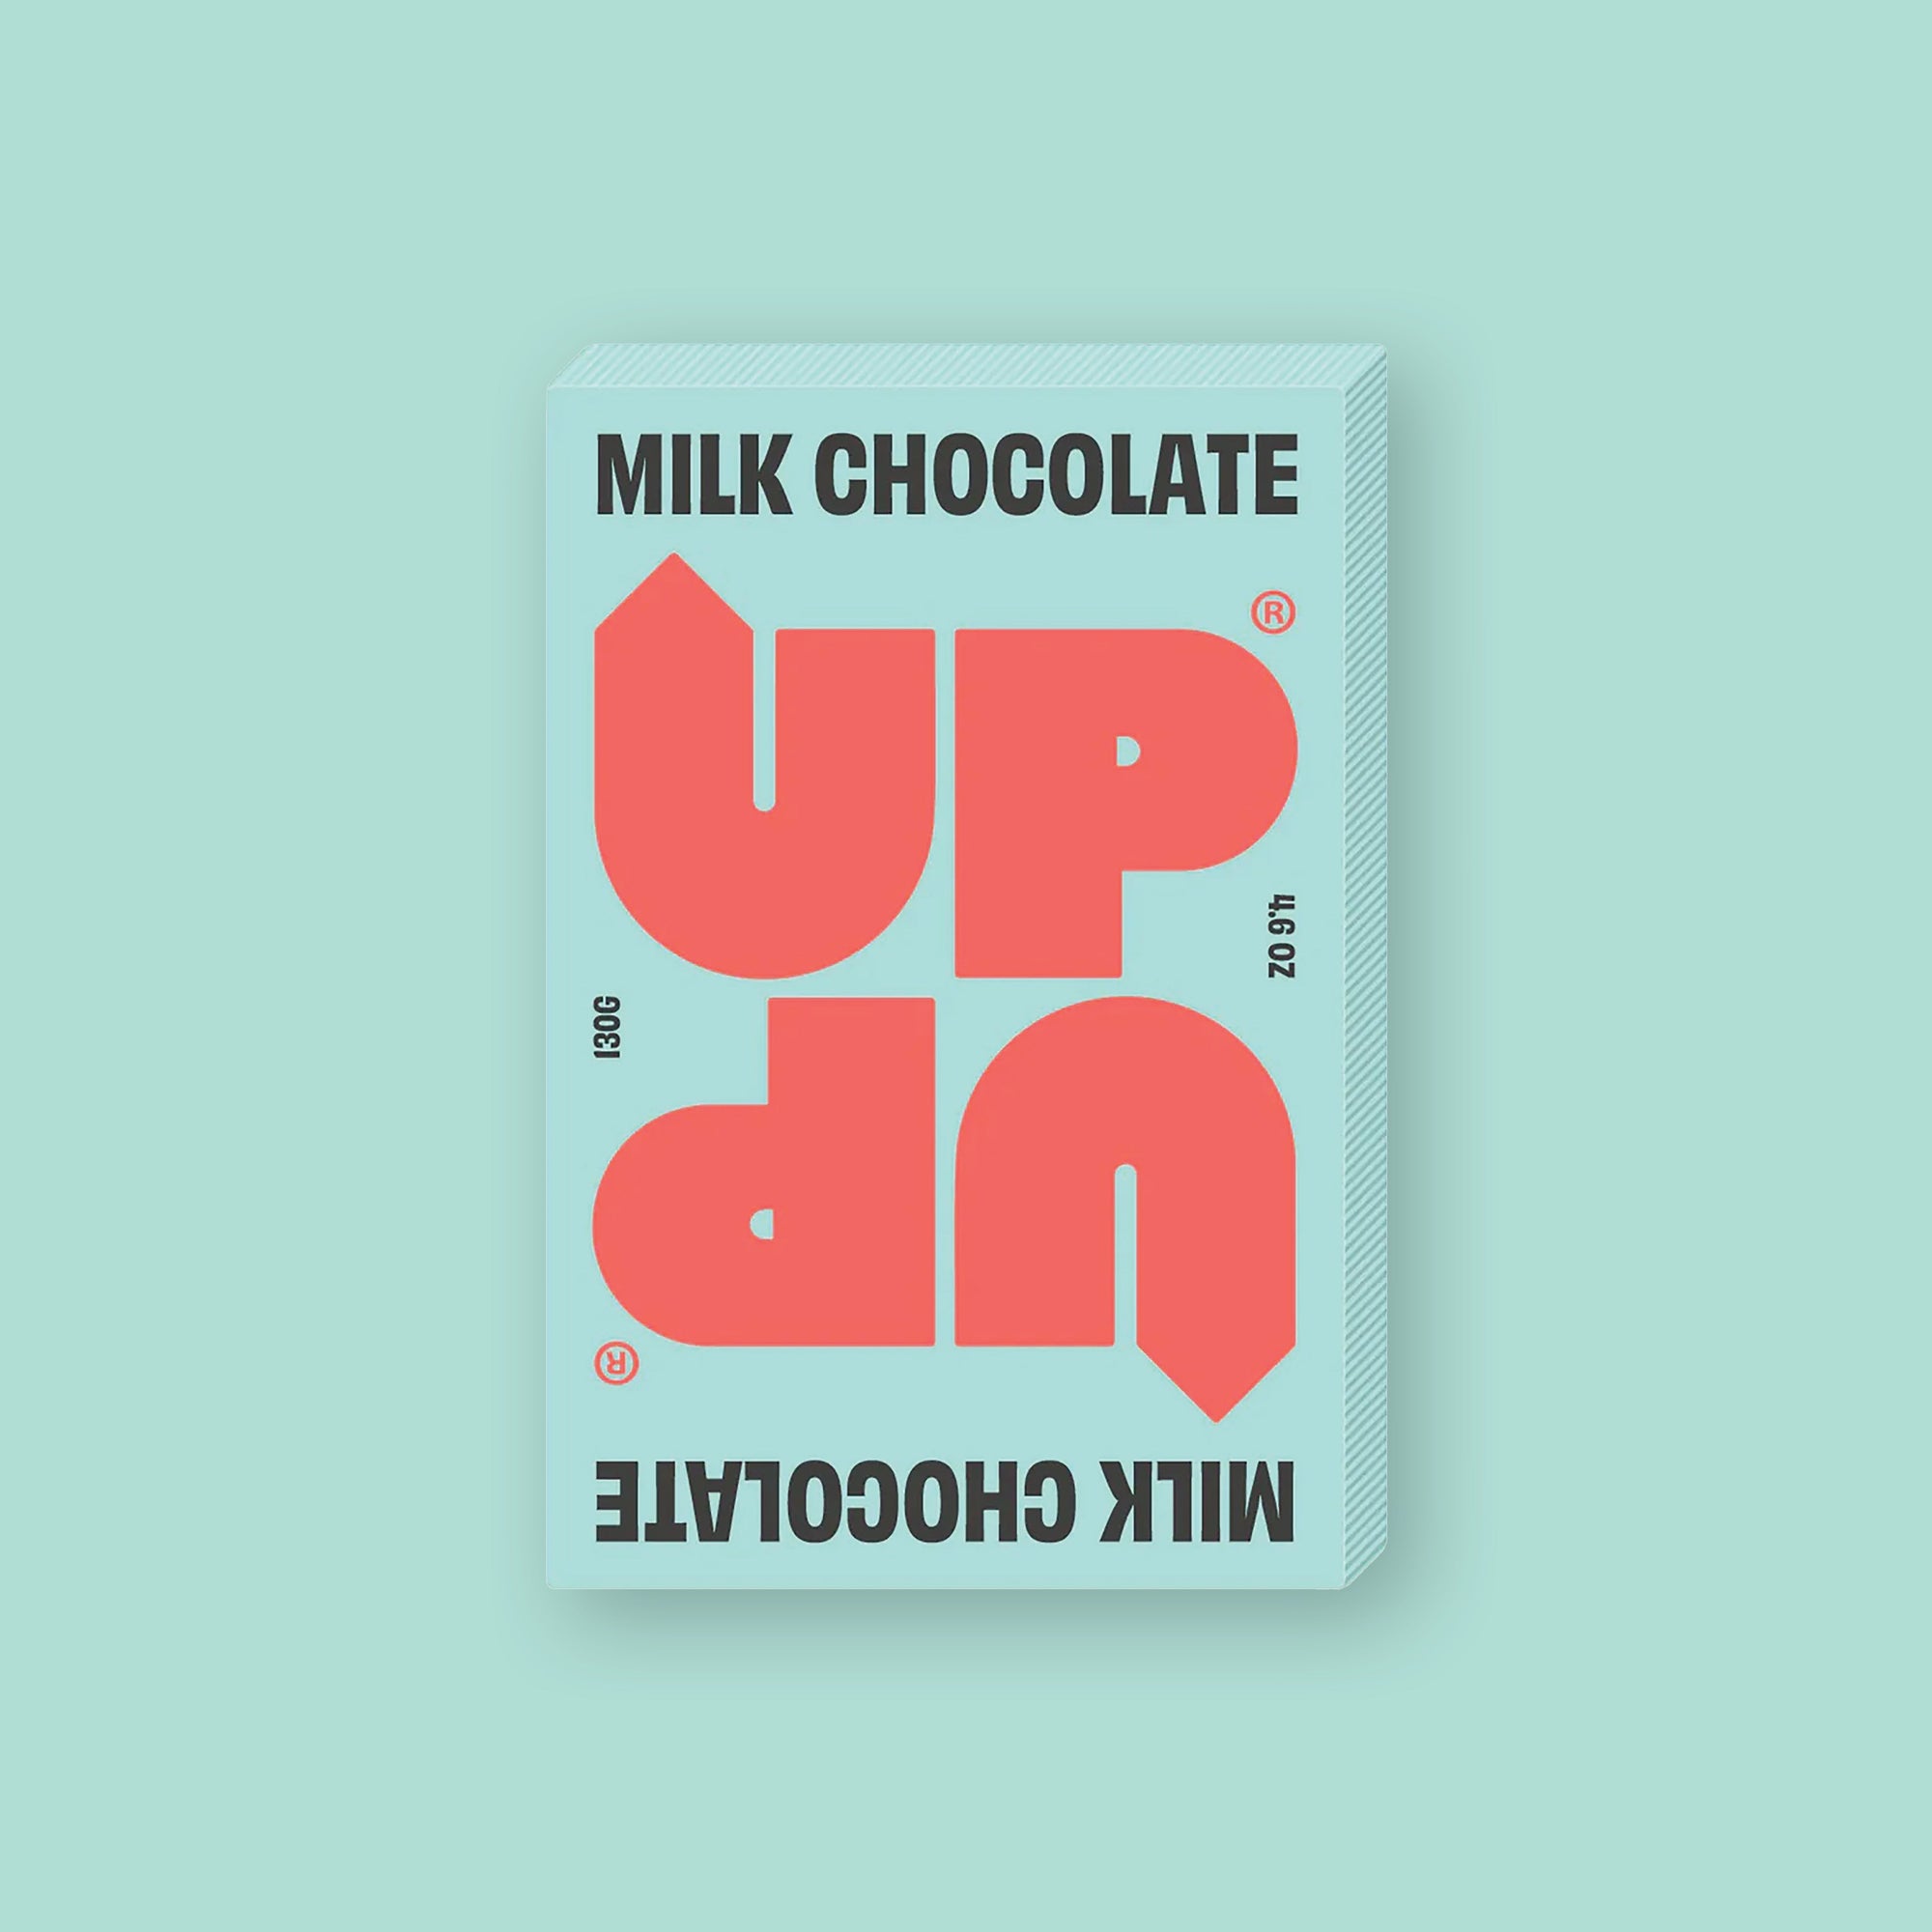 On a mint green background sits a box of UP UP Milk Chocolate. The packaging is in mint green and orangey-red. 130G 4.6 OZ